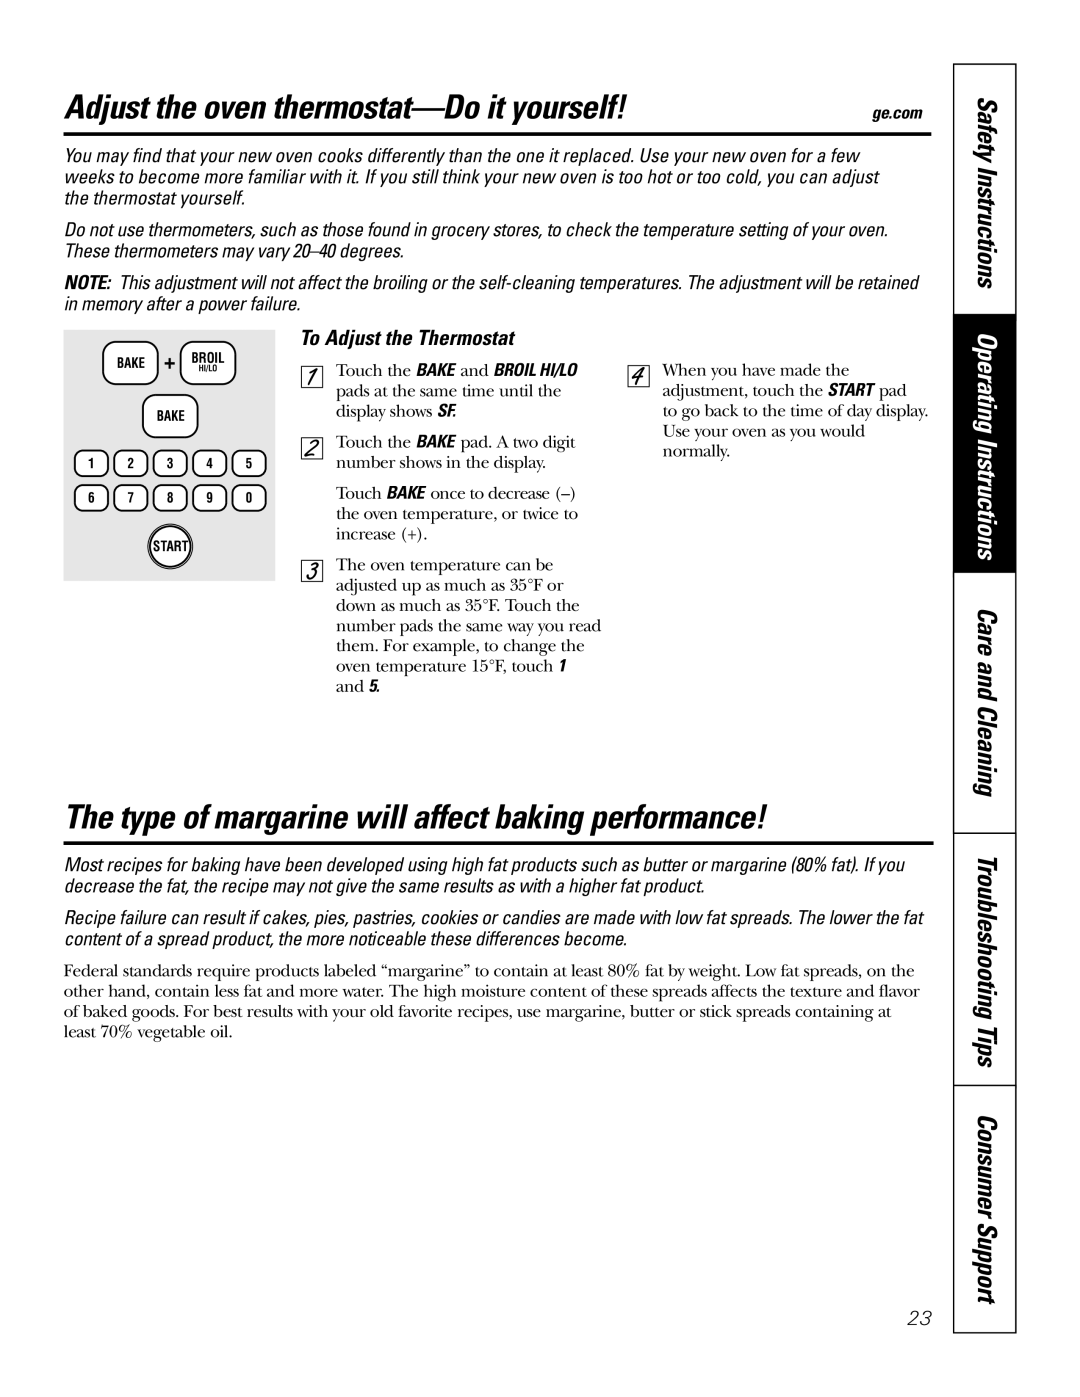 GE JBP74 owner manual Adjust the oven thermostat-Doit yourself, Safety Instructions, To Adjust the Thermostat 